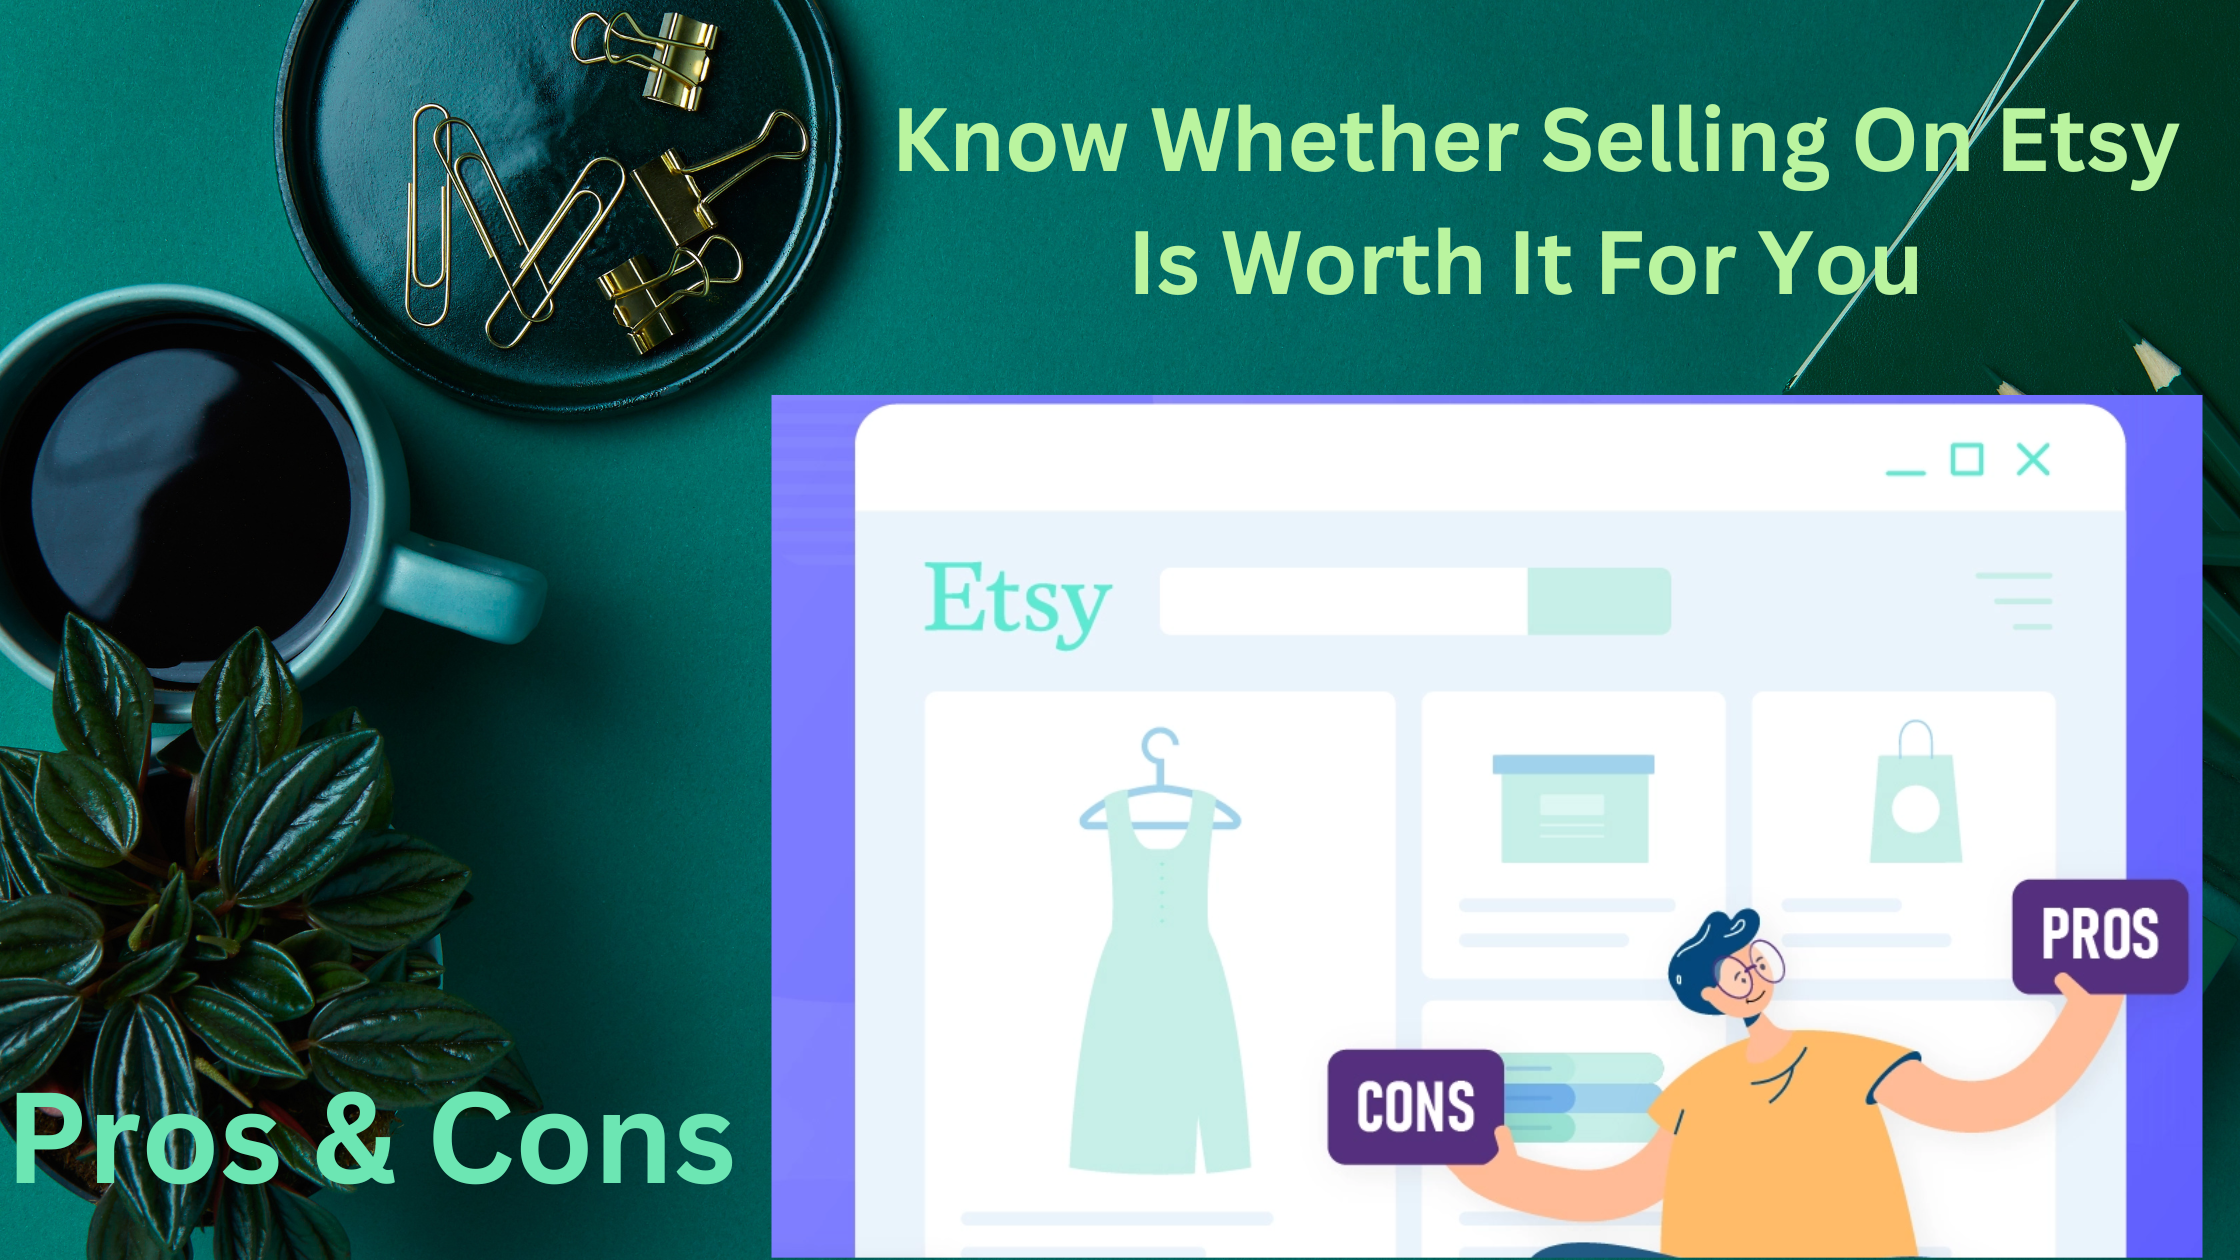 Pros & Cons- whether to sell on Etsy or not